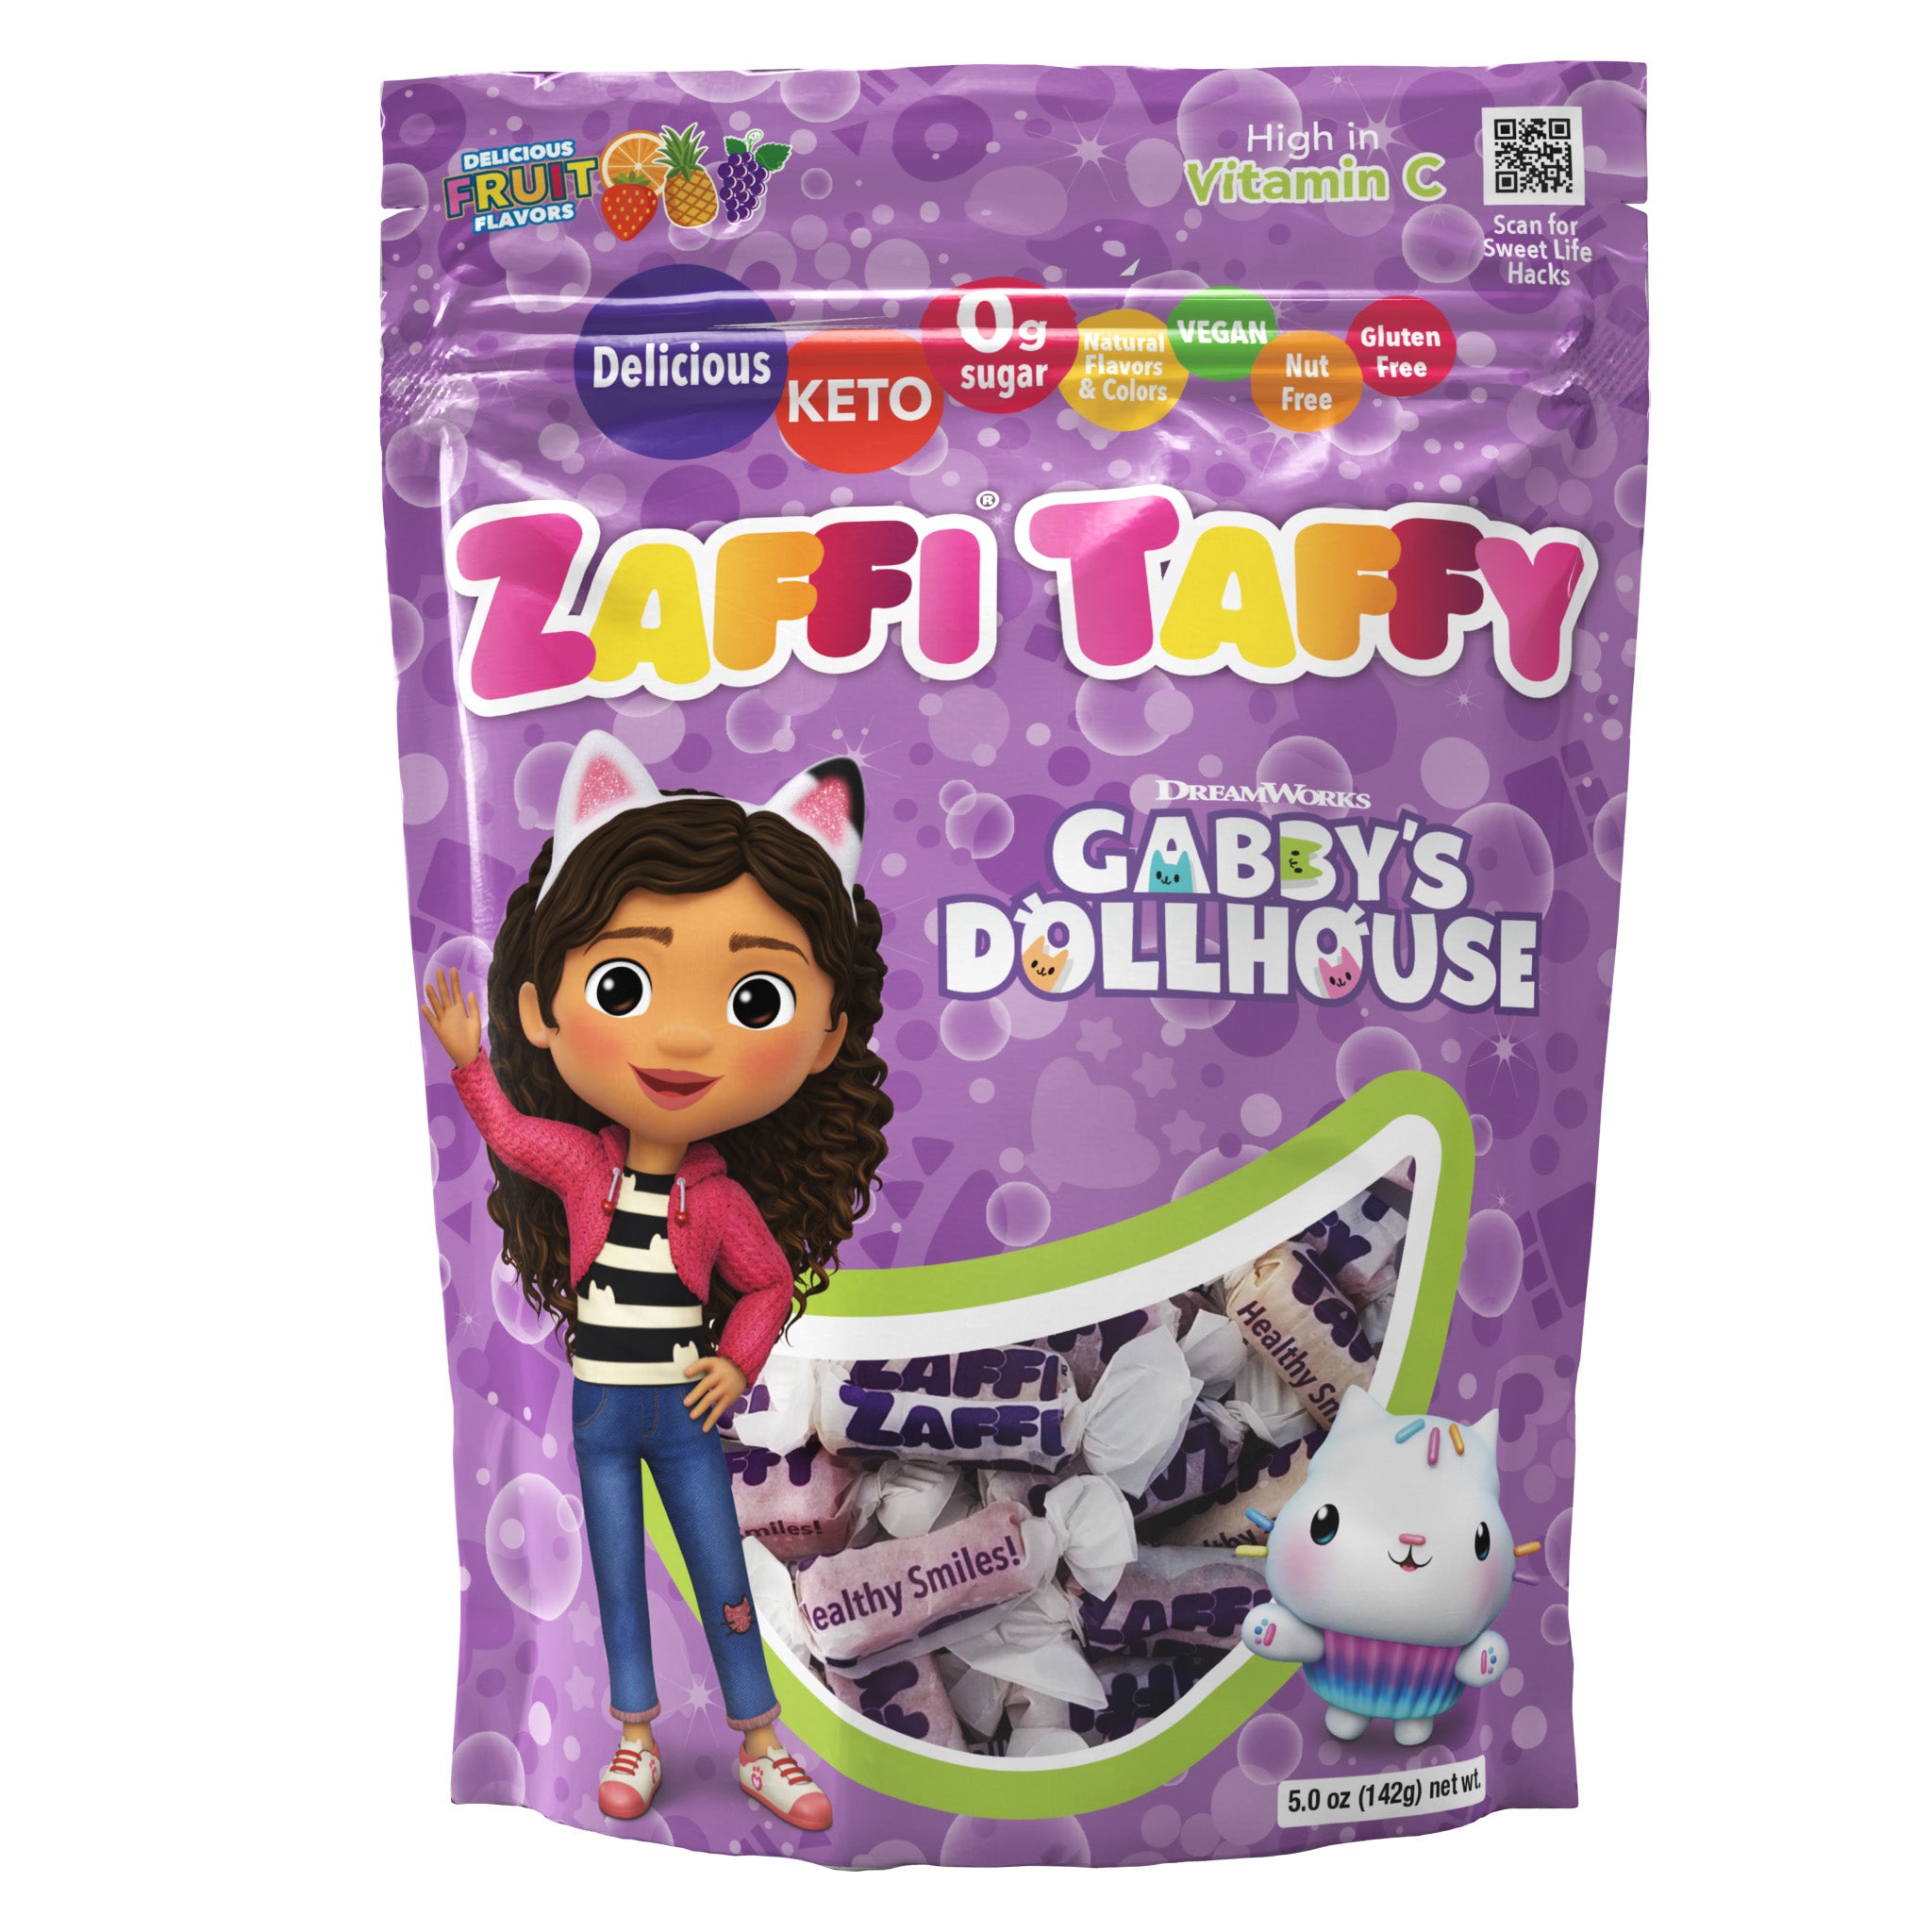 Limited edition Gabby’s Dollhouse Zaffi Taffy 5oz pack in Fruit Assortment of flavors.